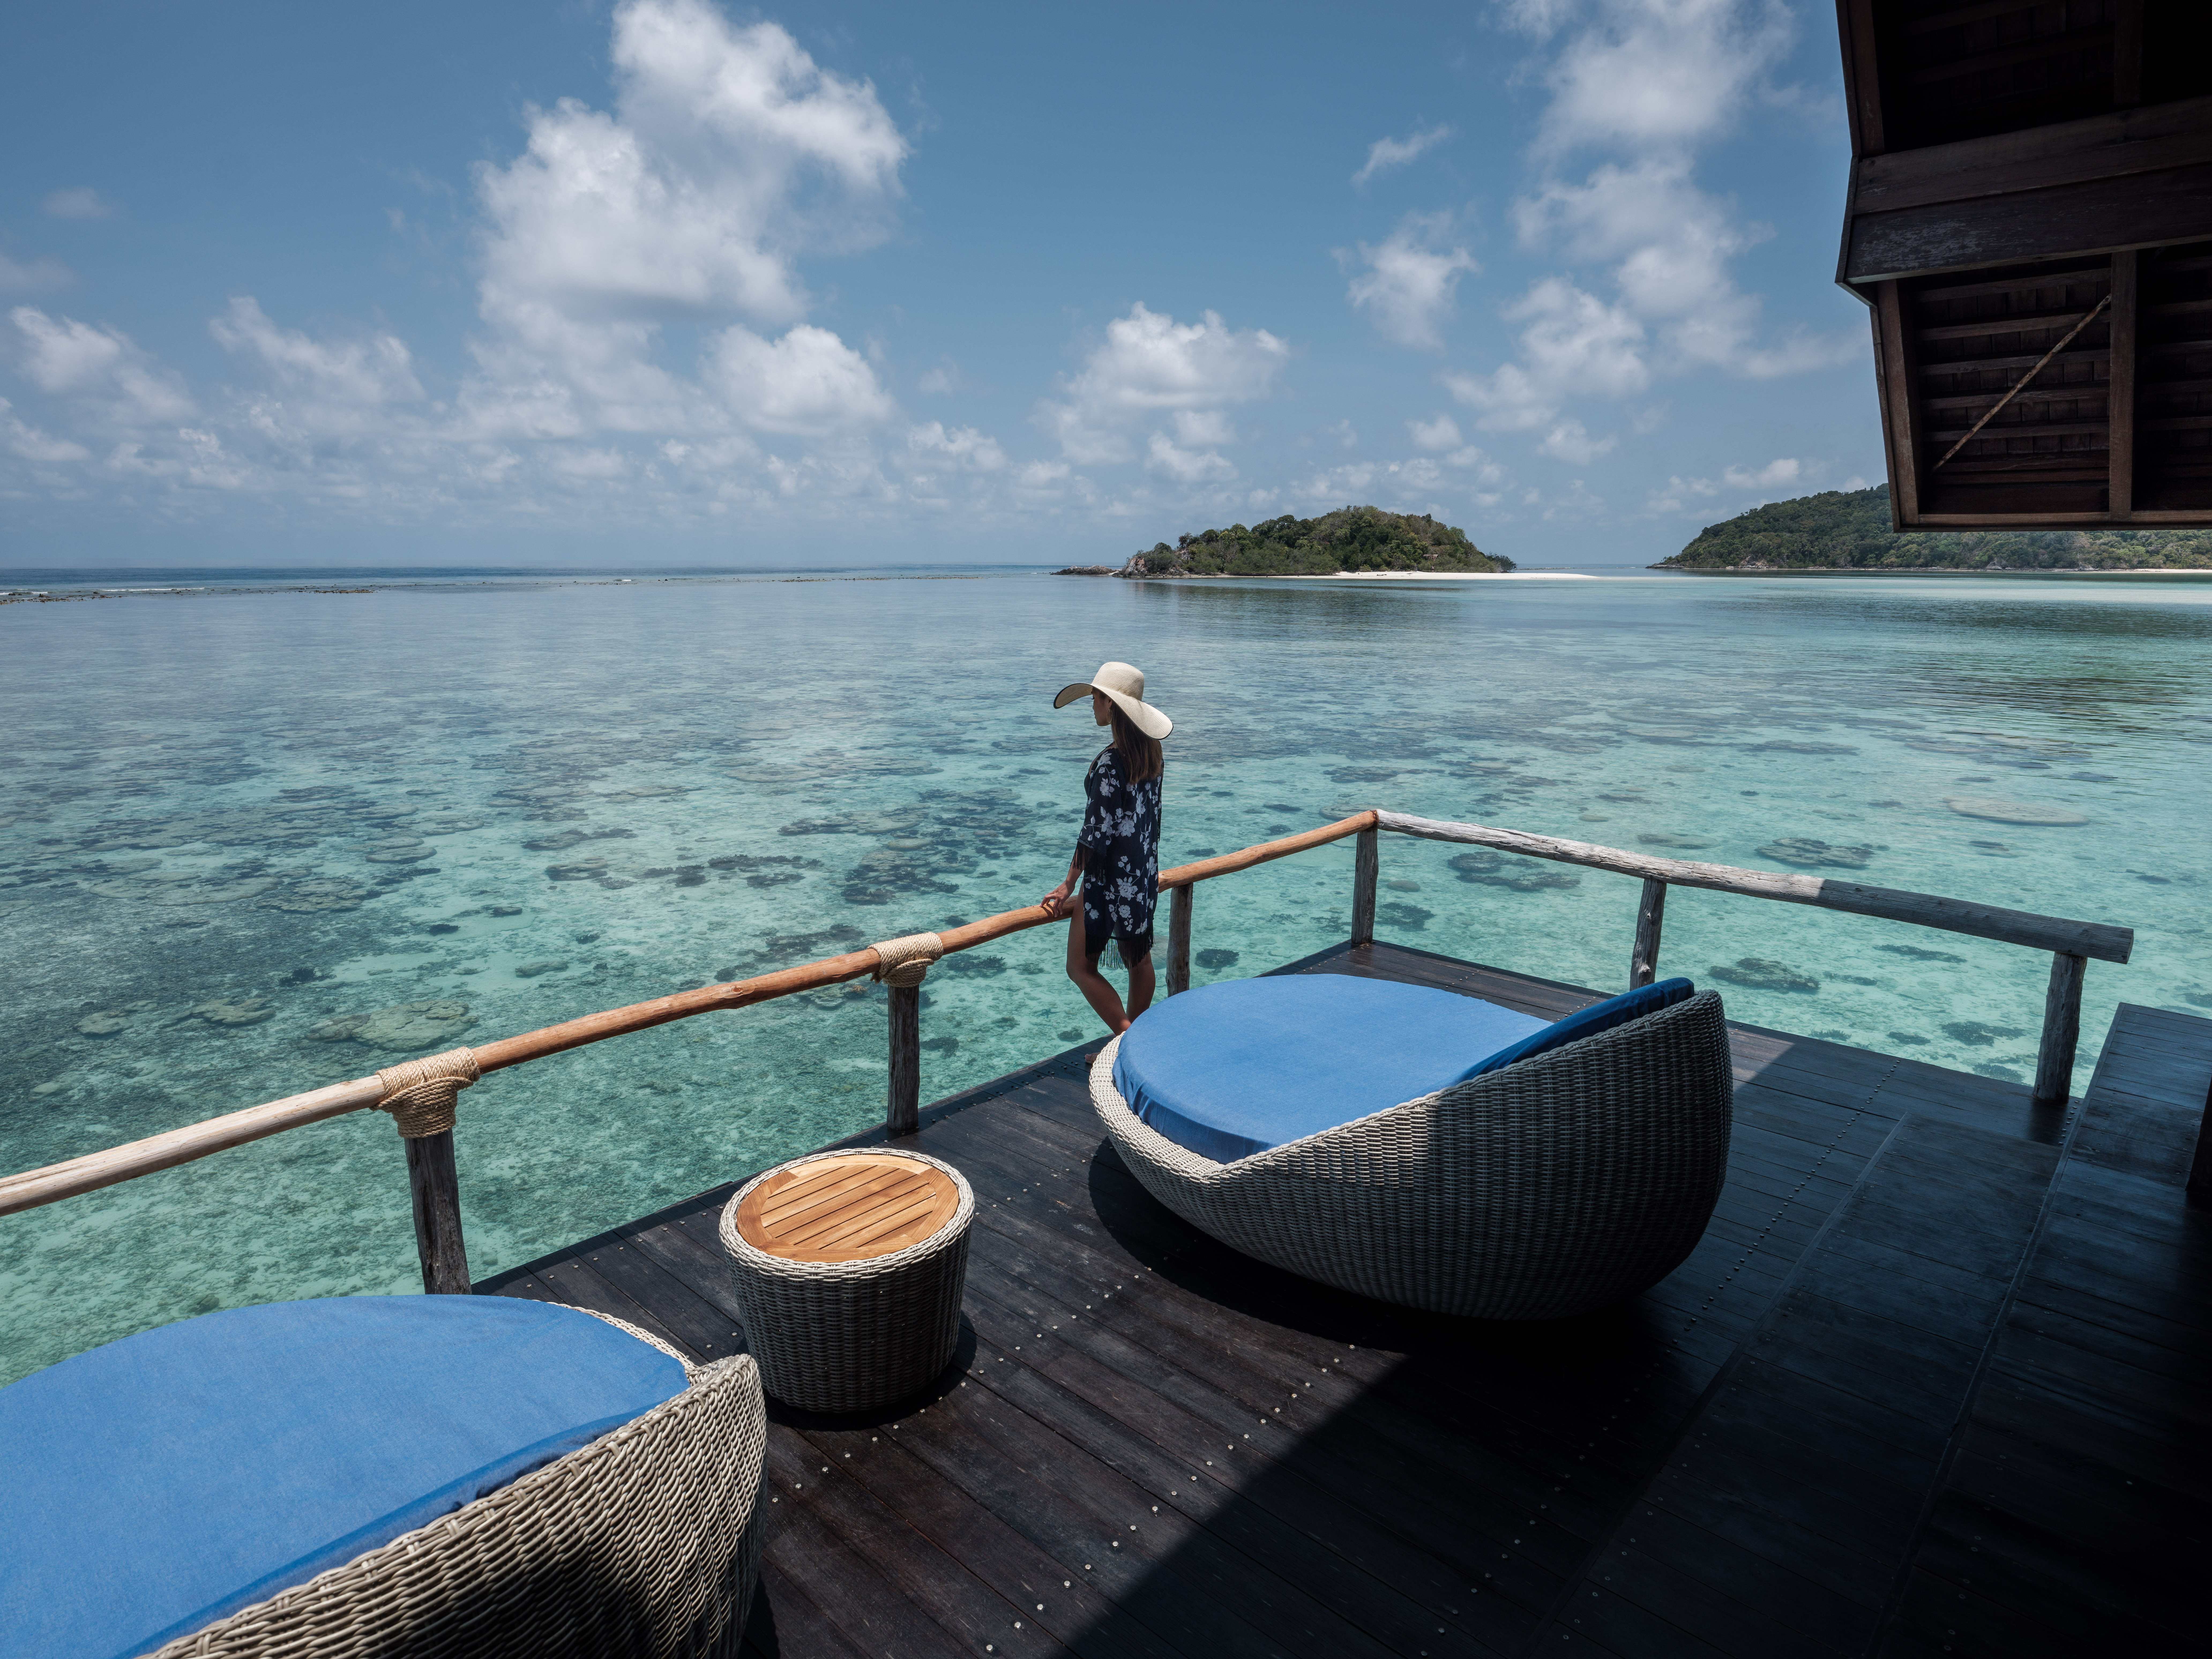 asian_girl_straw_hat_black_robe_hand_wood_banister_standing_overwater_sun_terrace_admiring_view_rattan_sun_beds_muerba_behind_with_sanggah_background